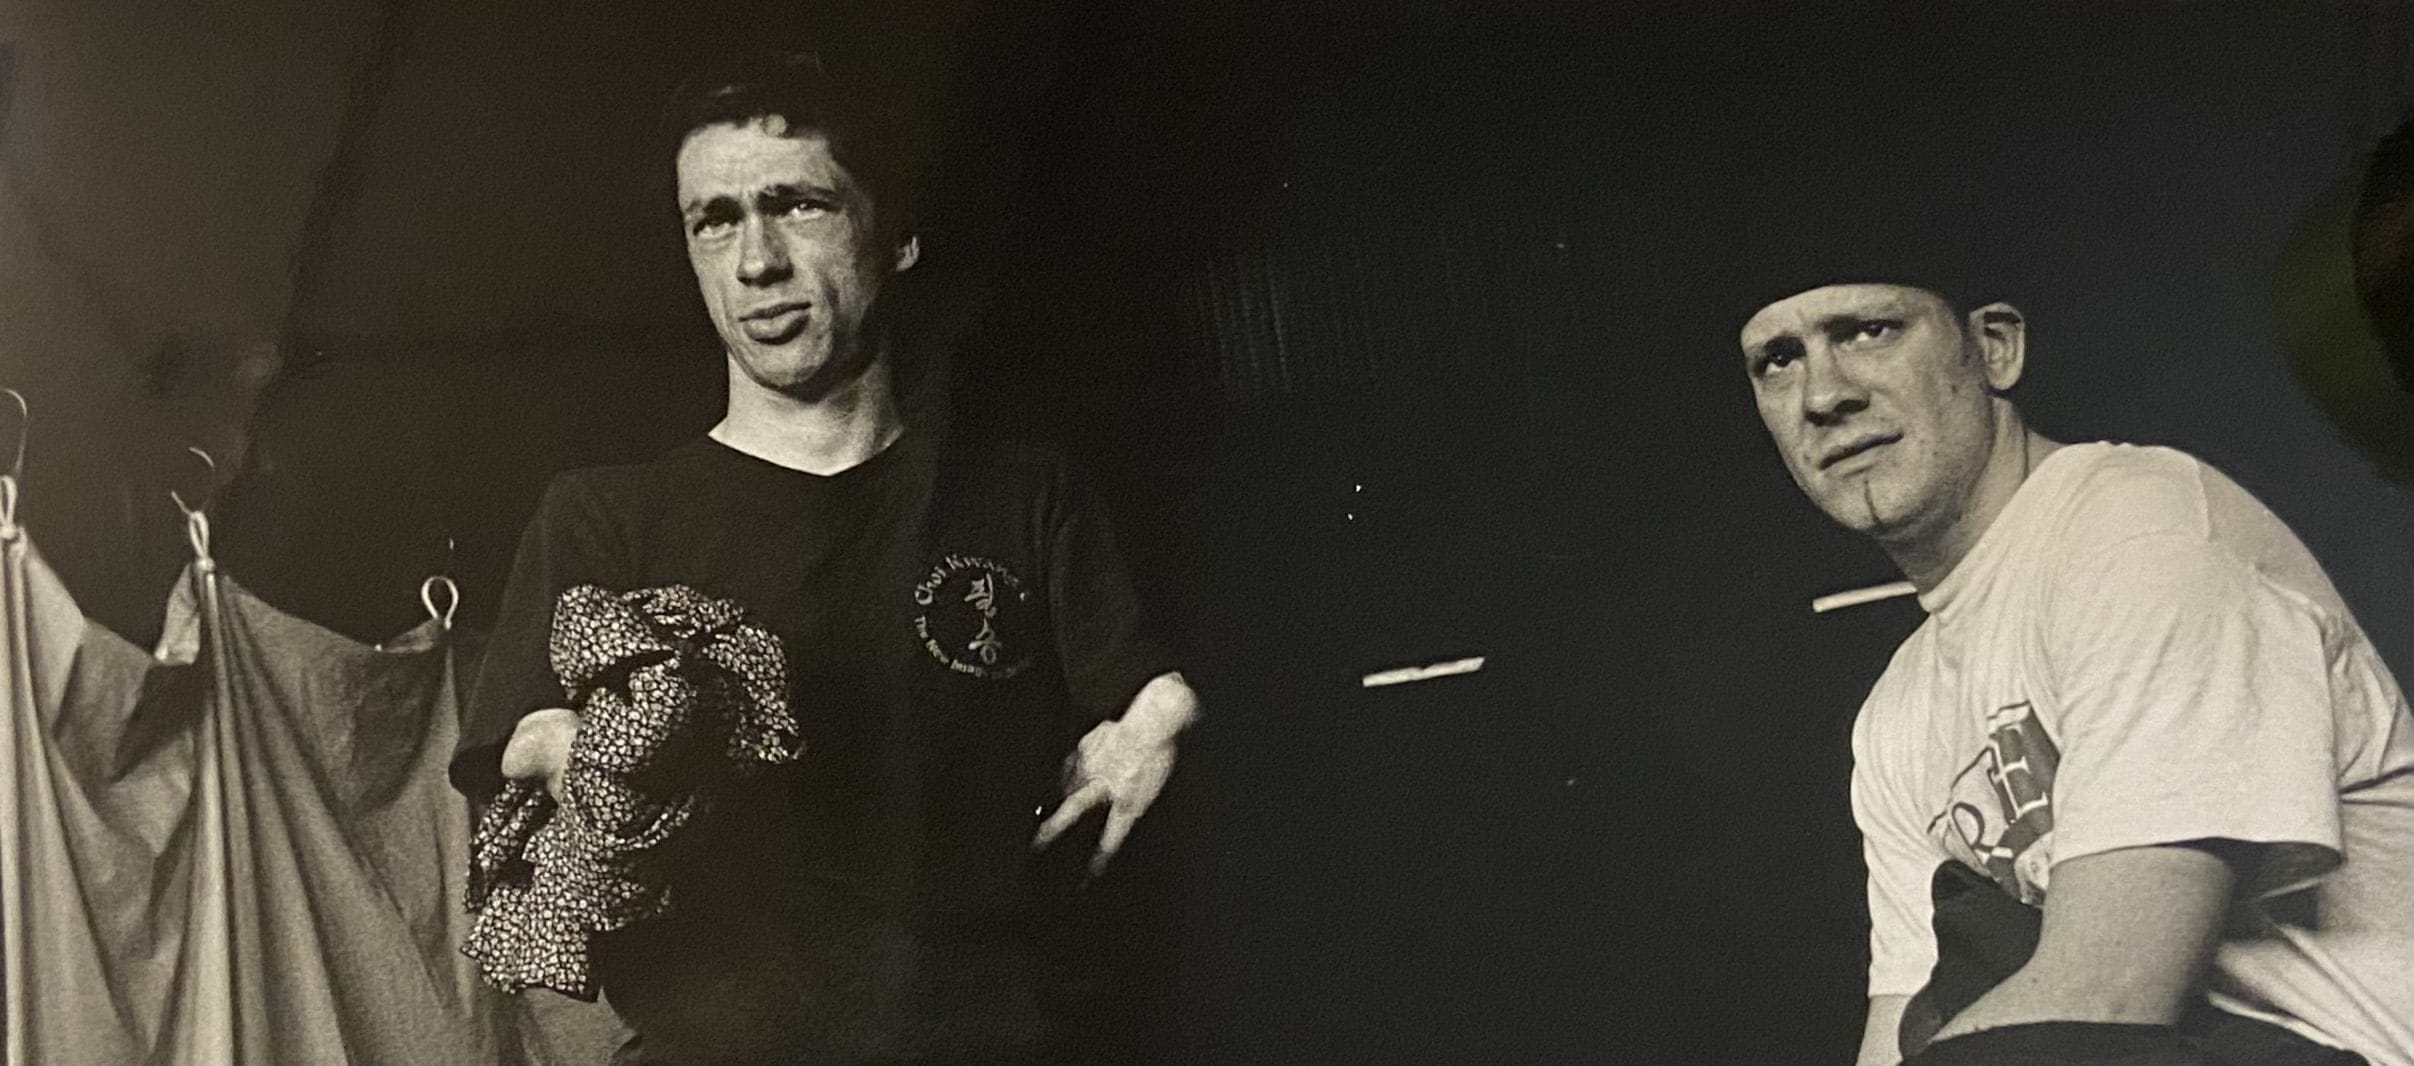 Black and white photo of two actors onstage. Mat Fraser is on the left side, next to him is another actor.